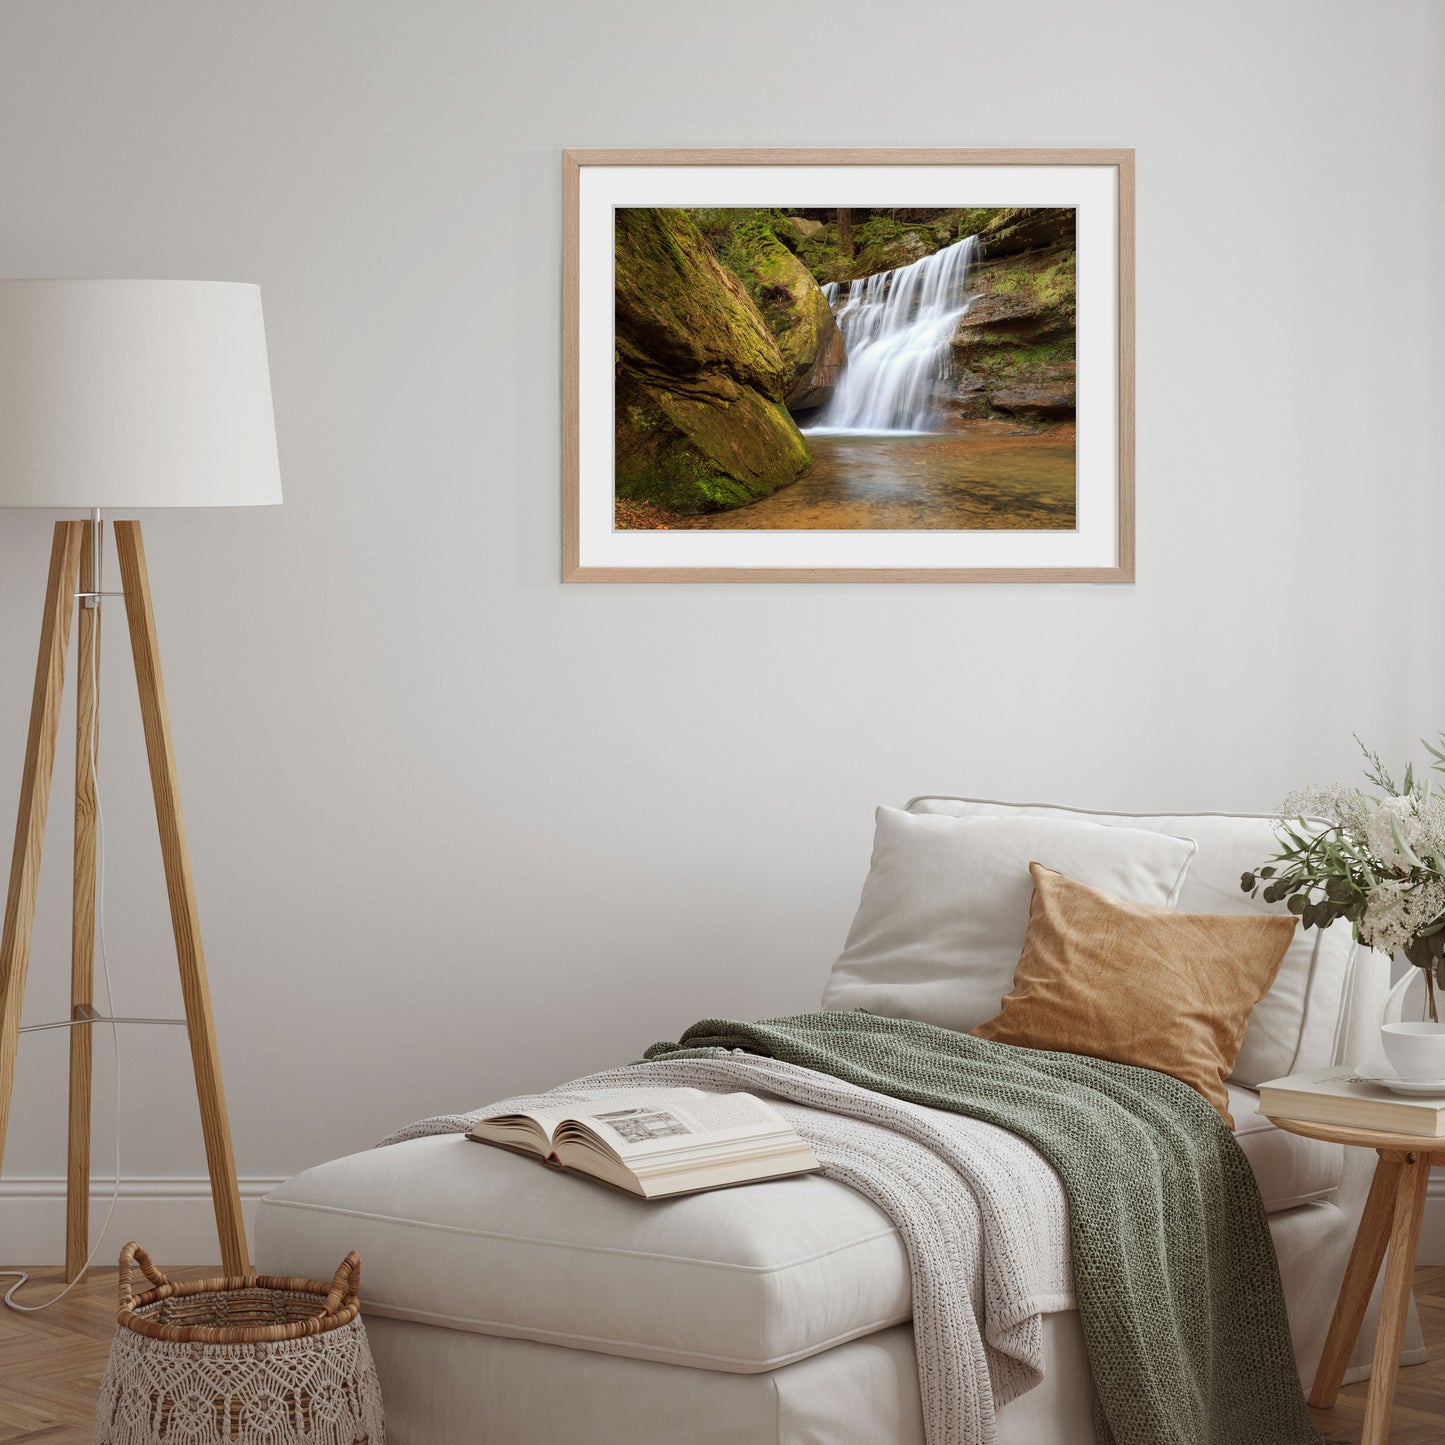 Hocking Hills, Ohio, comes to life in this striking piece of wall art, depicting the peaceful harmony of a waterfall as it flows over textured rocks surrounded by nature's embrace.